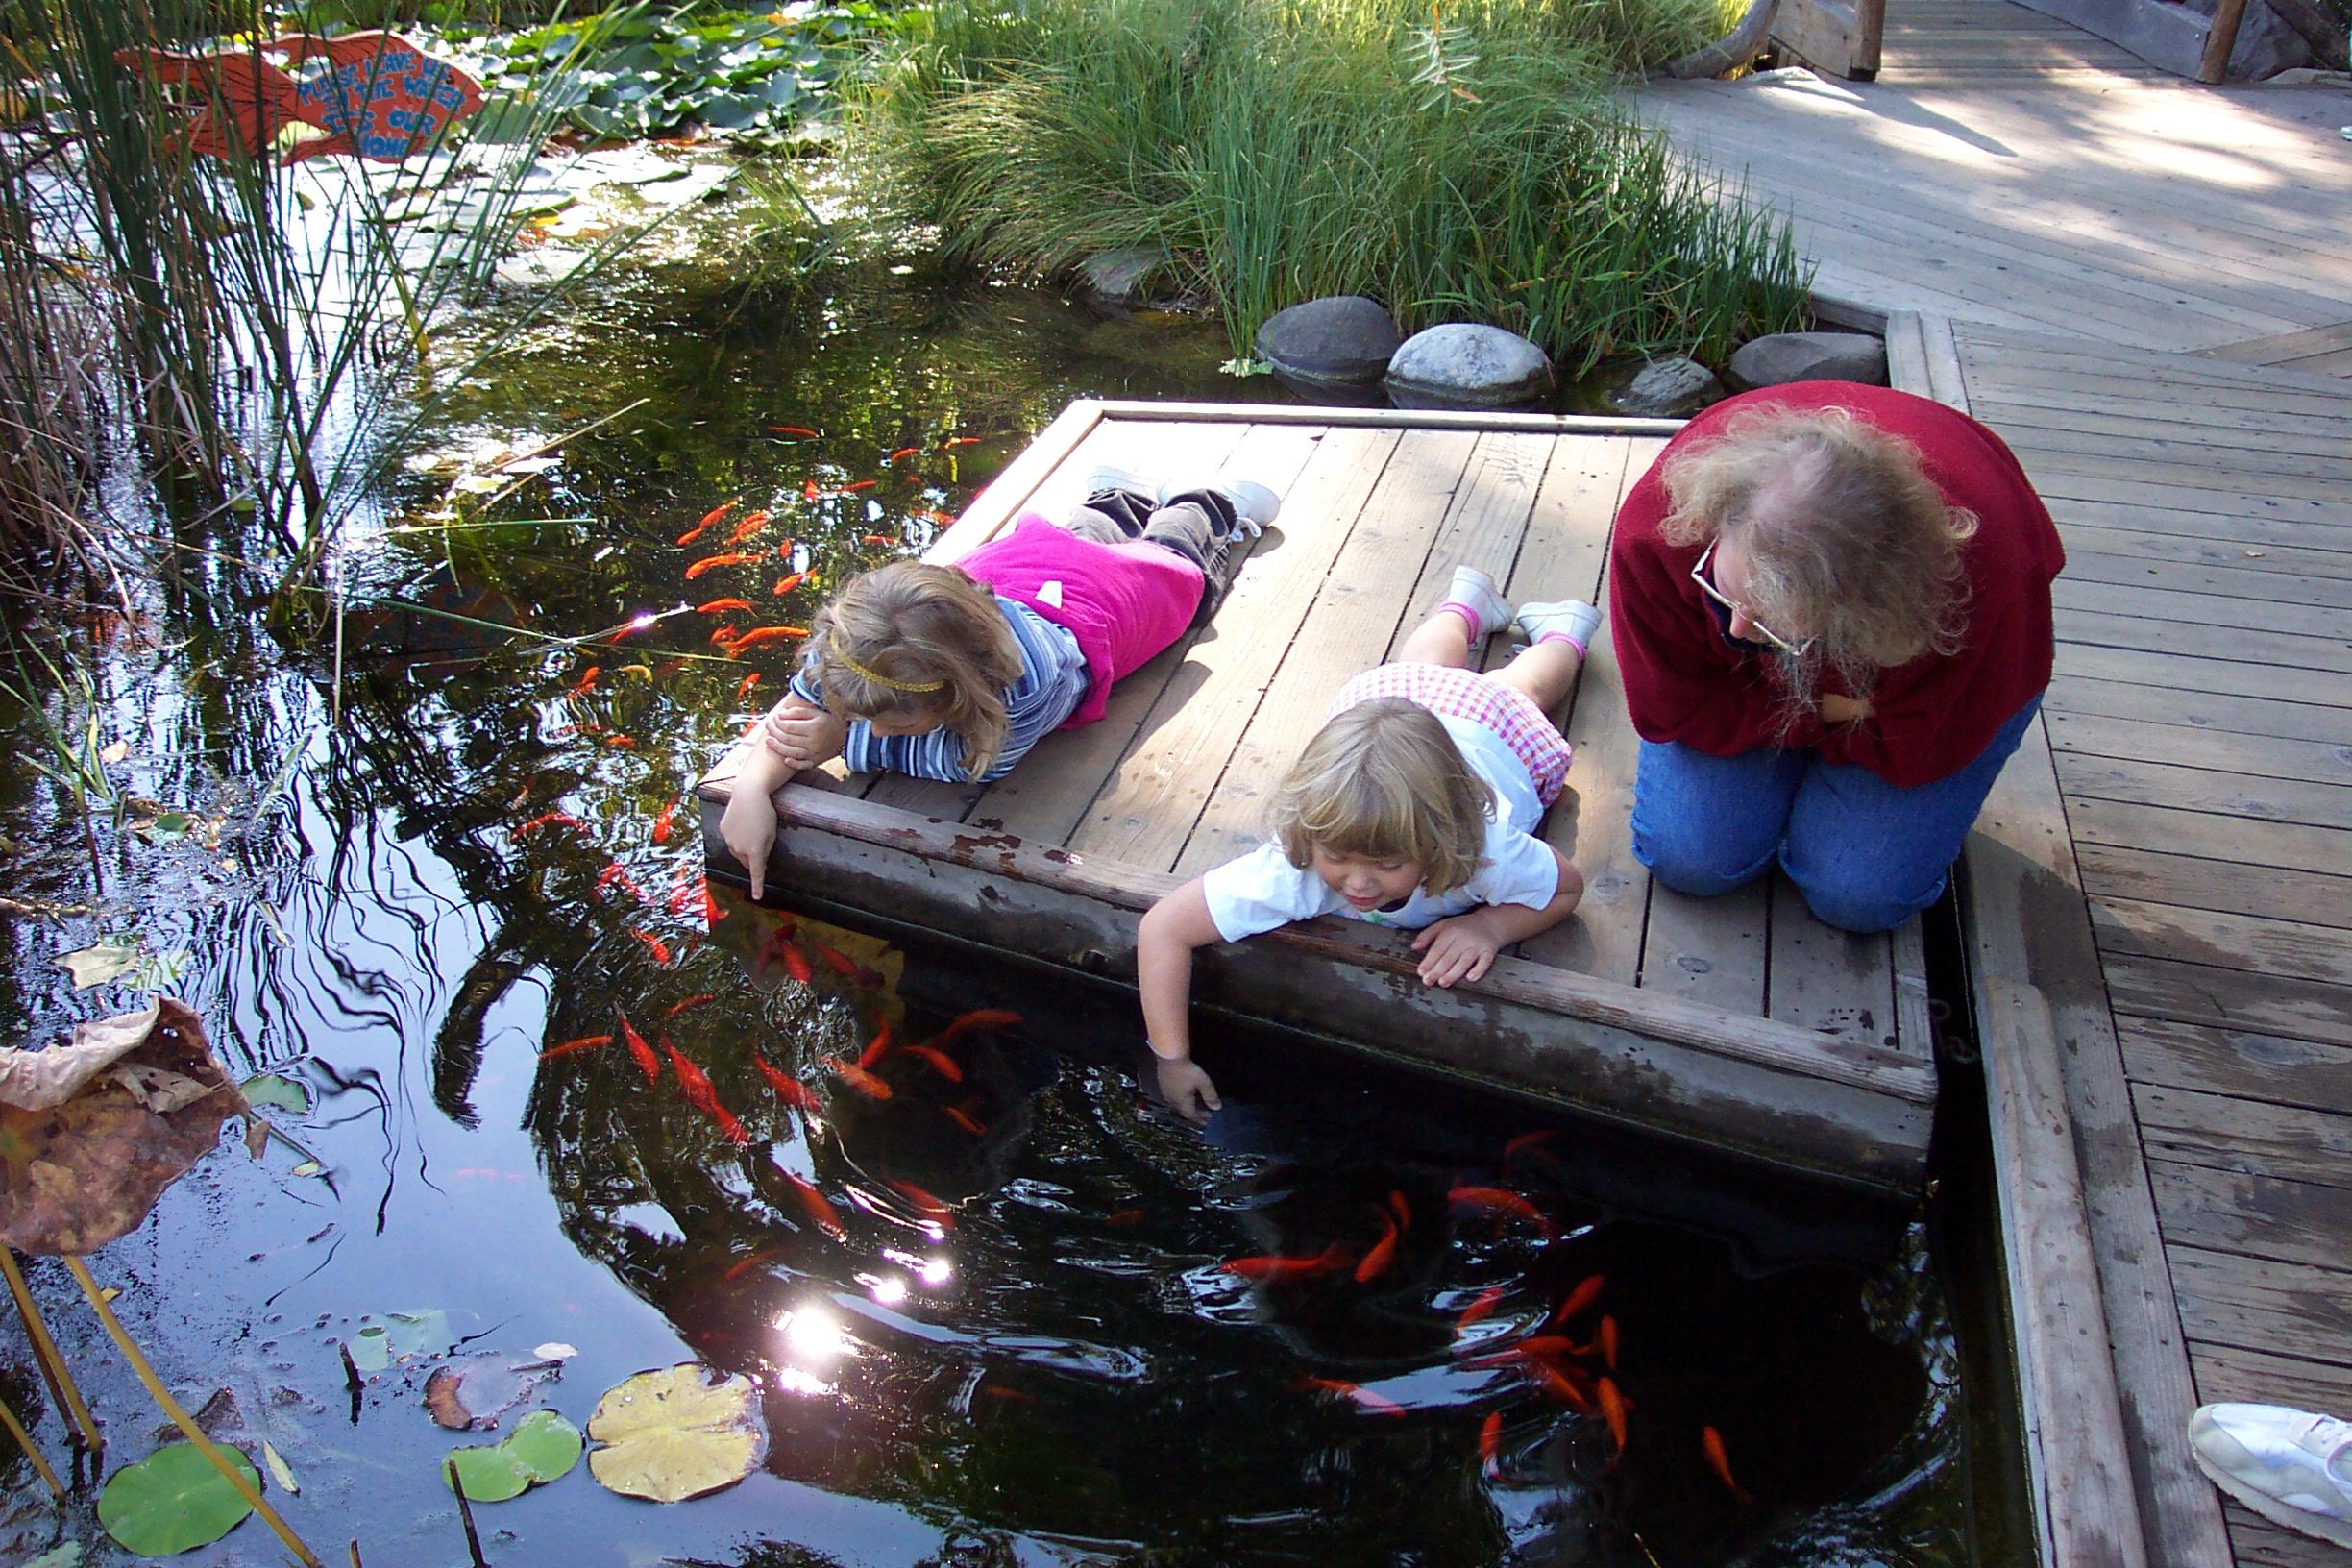 Kids And Fish Pond: Over 5,619 Royalty-Free Licensable Stock Photos